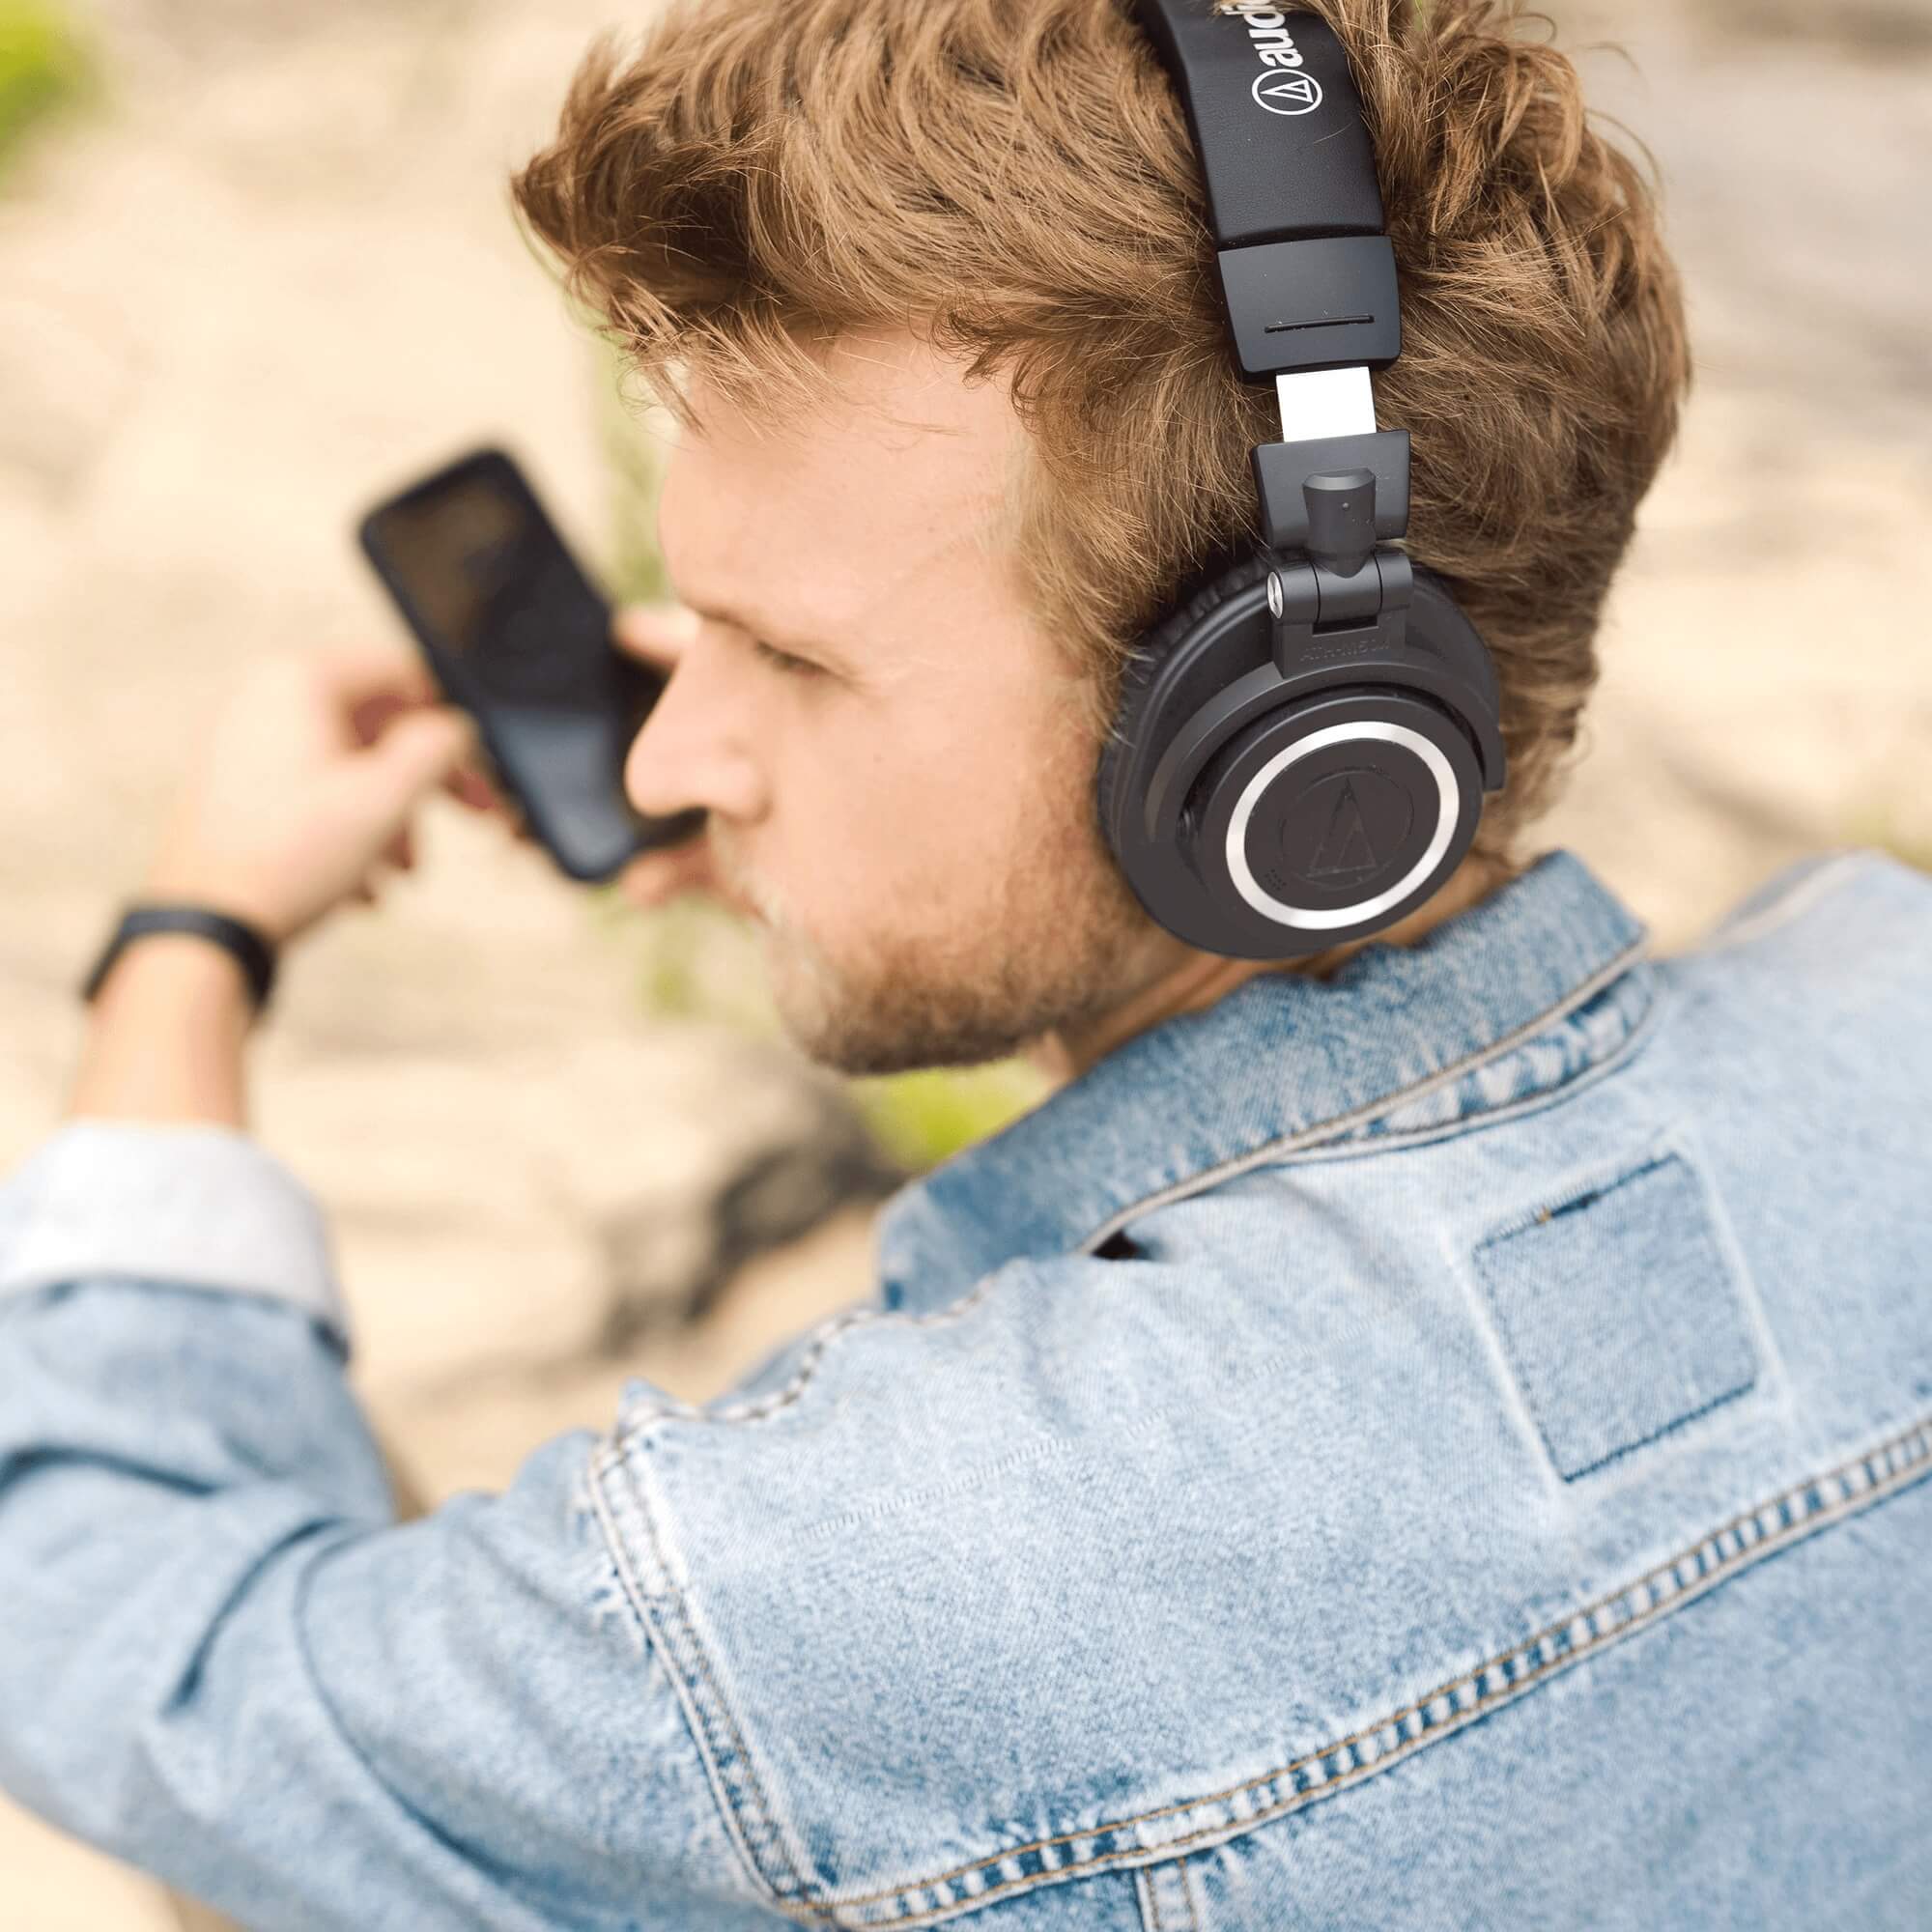 Audio-Technica ATH-M50xBT2 Bluetooth Wireless Over-Ear Headphones on a young man listening to music on his phone